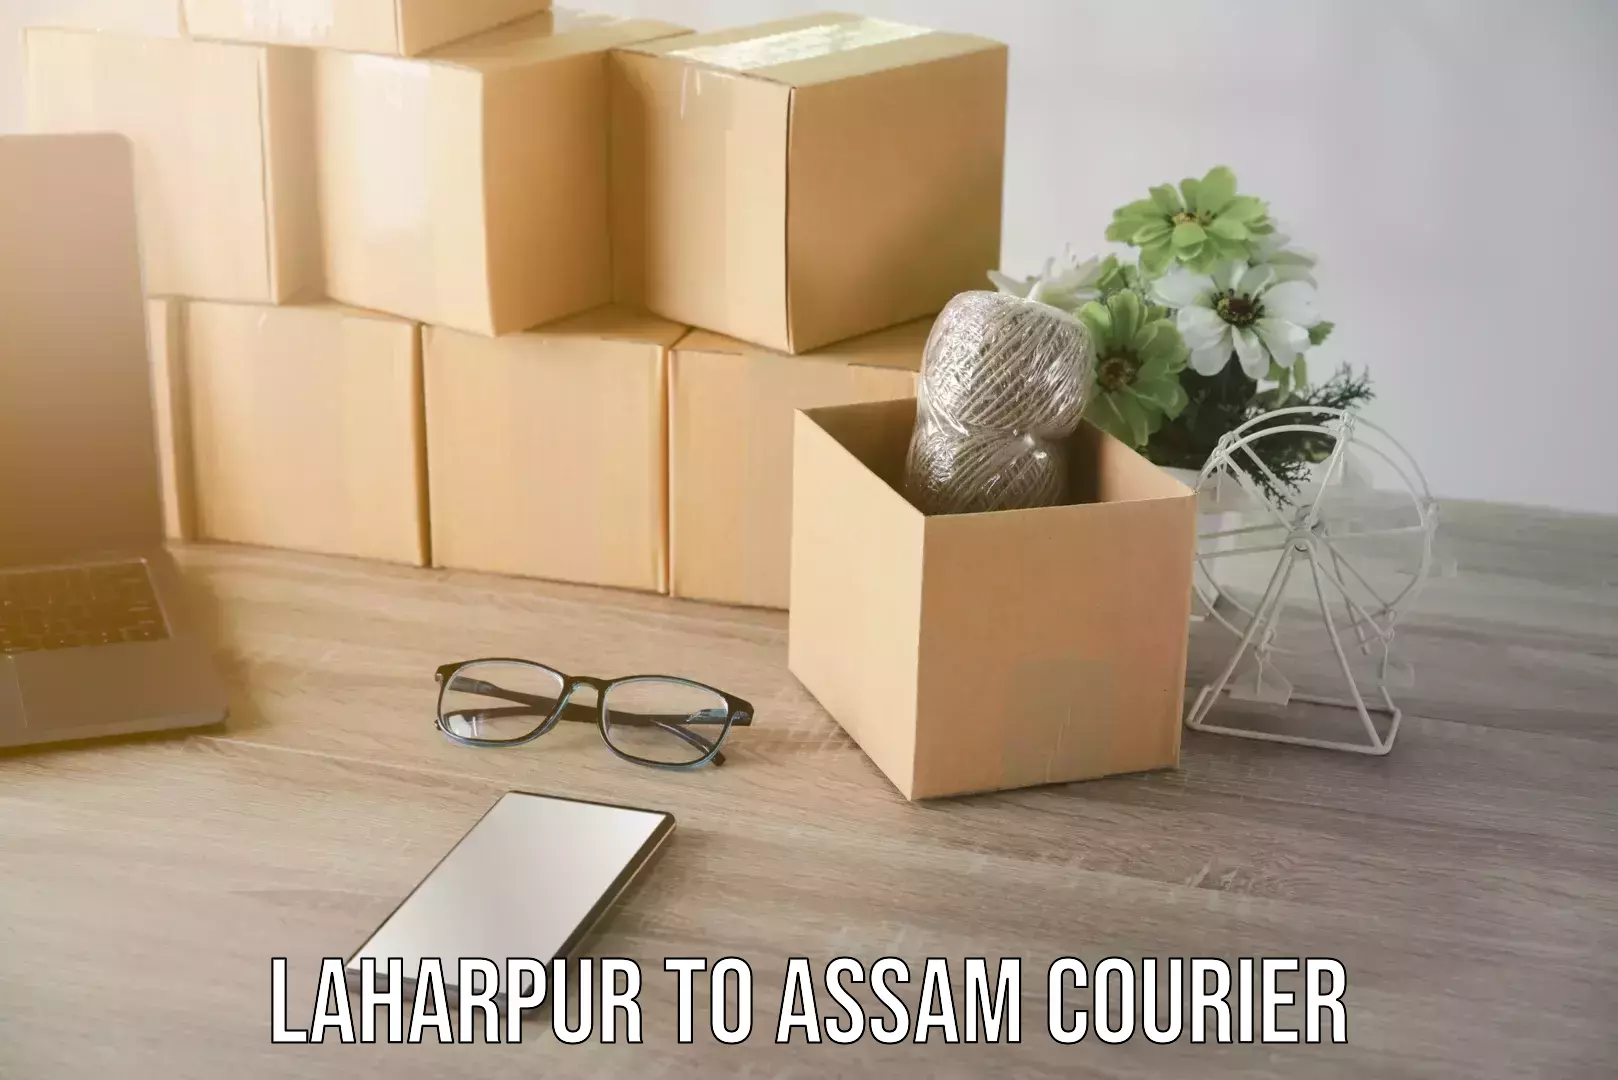 Furniture relocation experts Laharpur to Assam